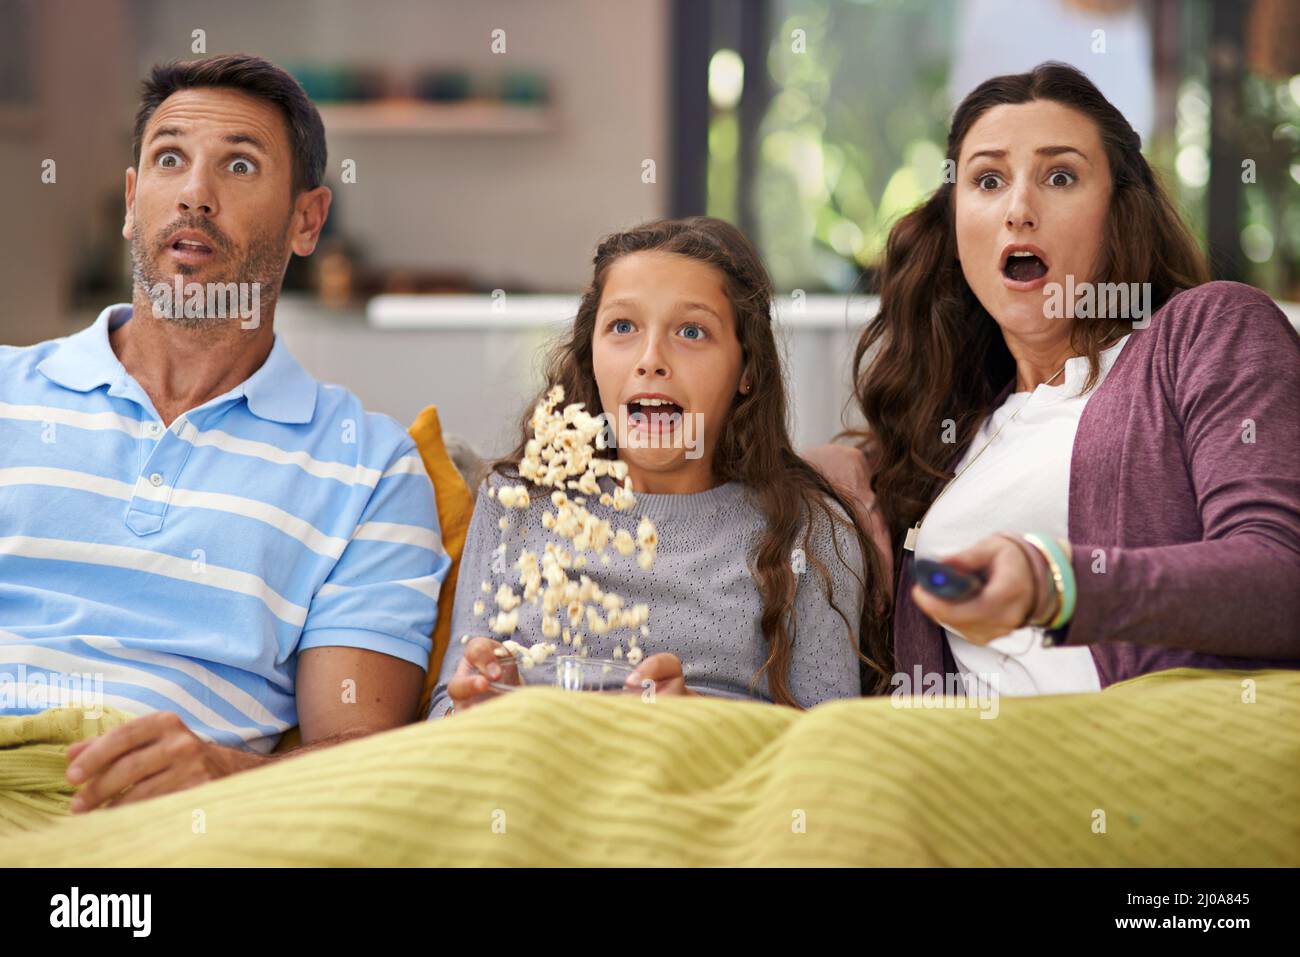 They love scary movies. Shot of a family sitting on their living room sofa watching a movie and eating popcorn. Stock Photo